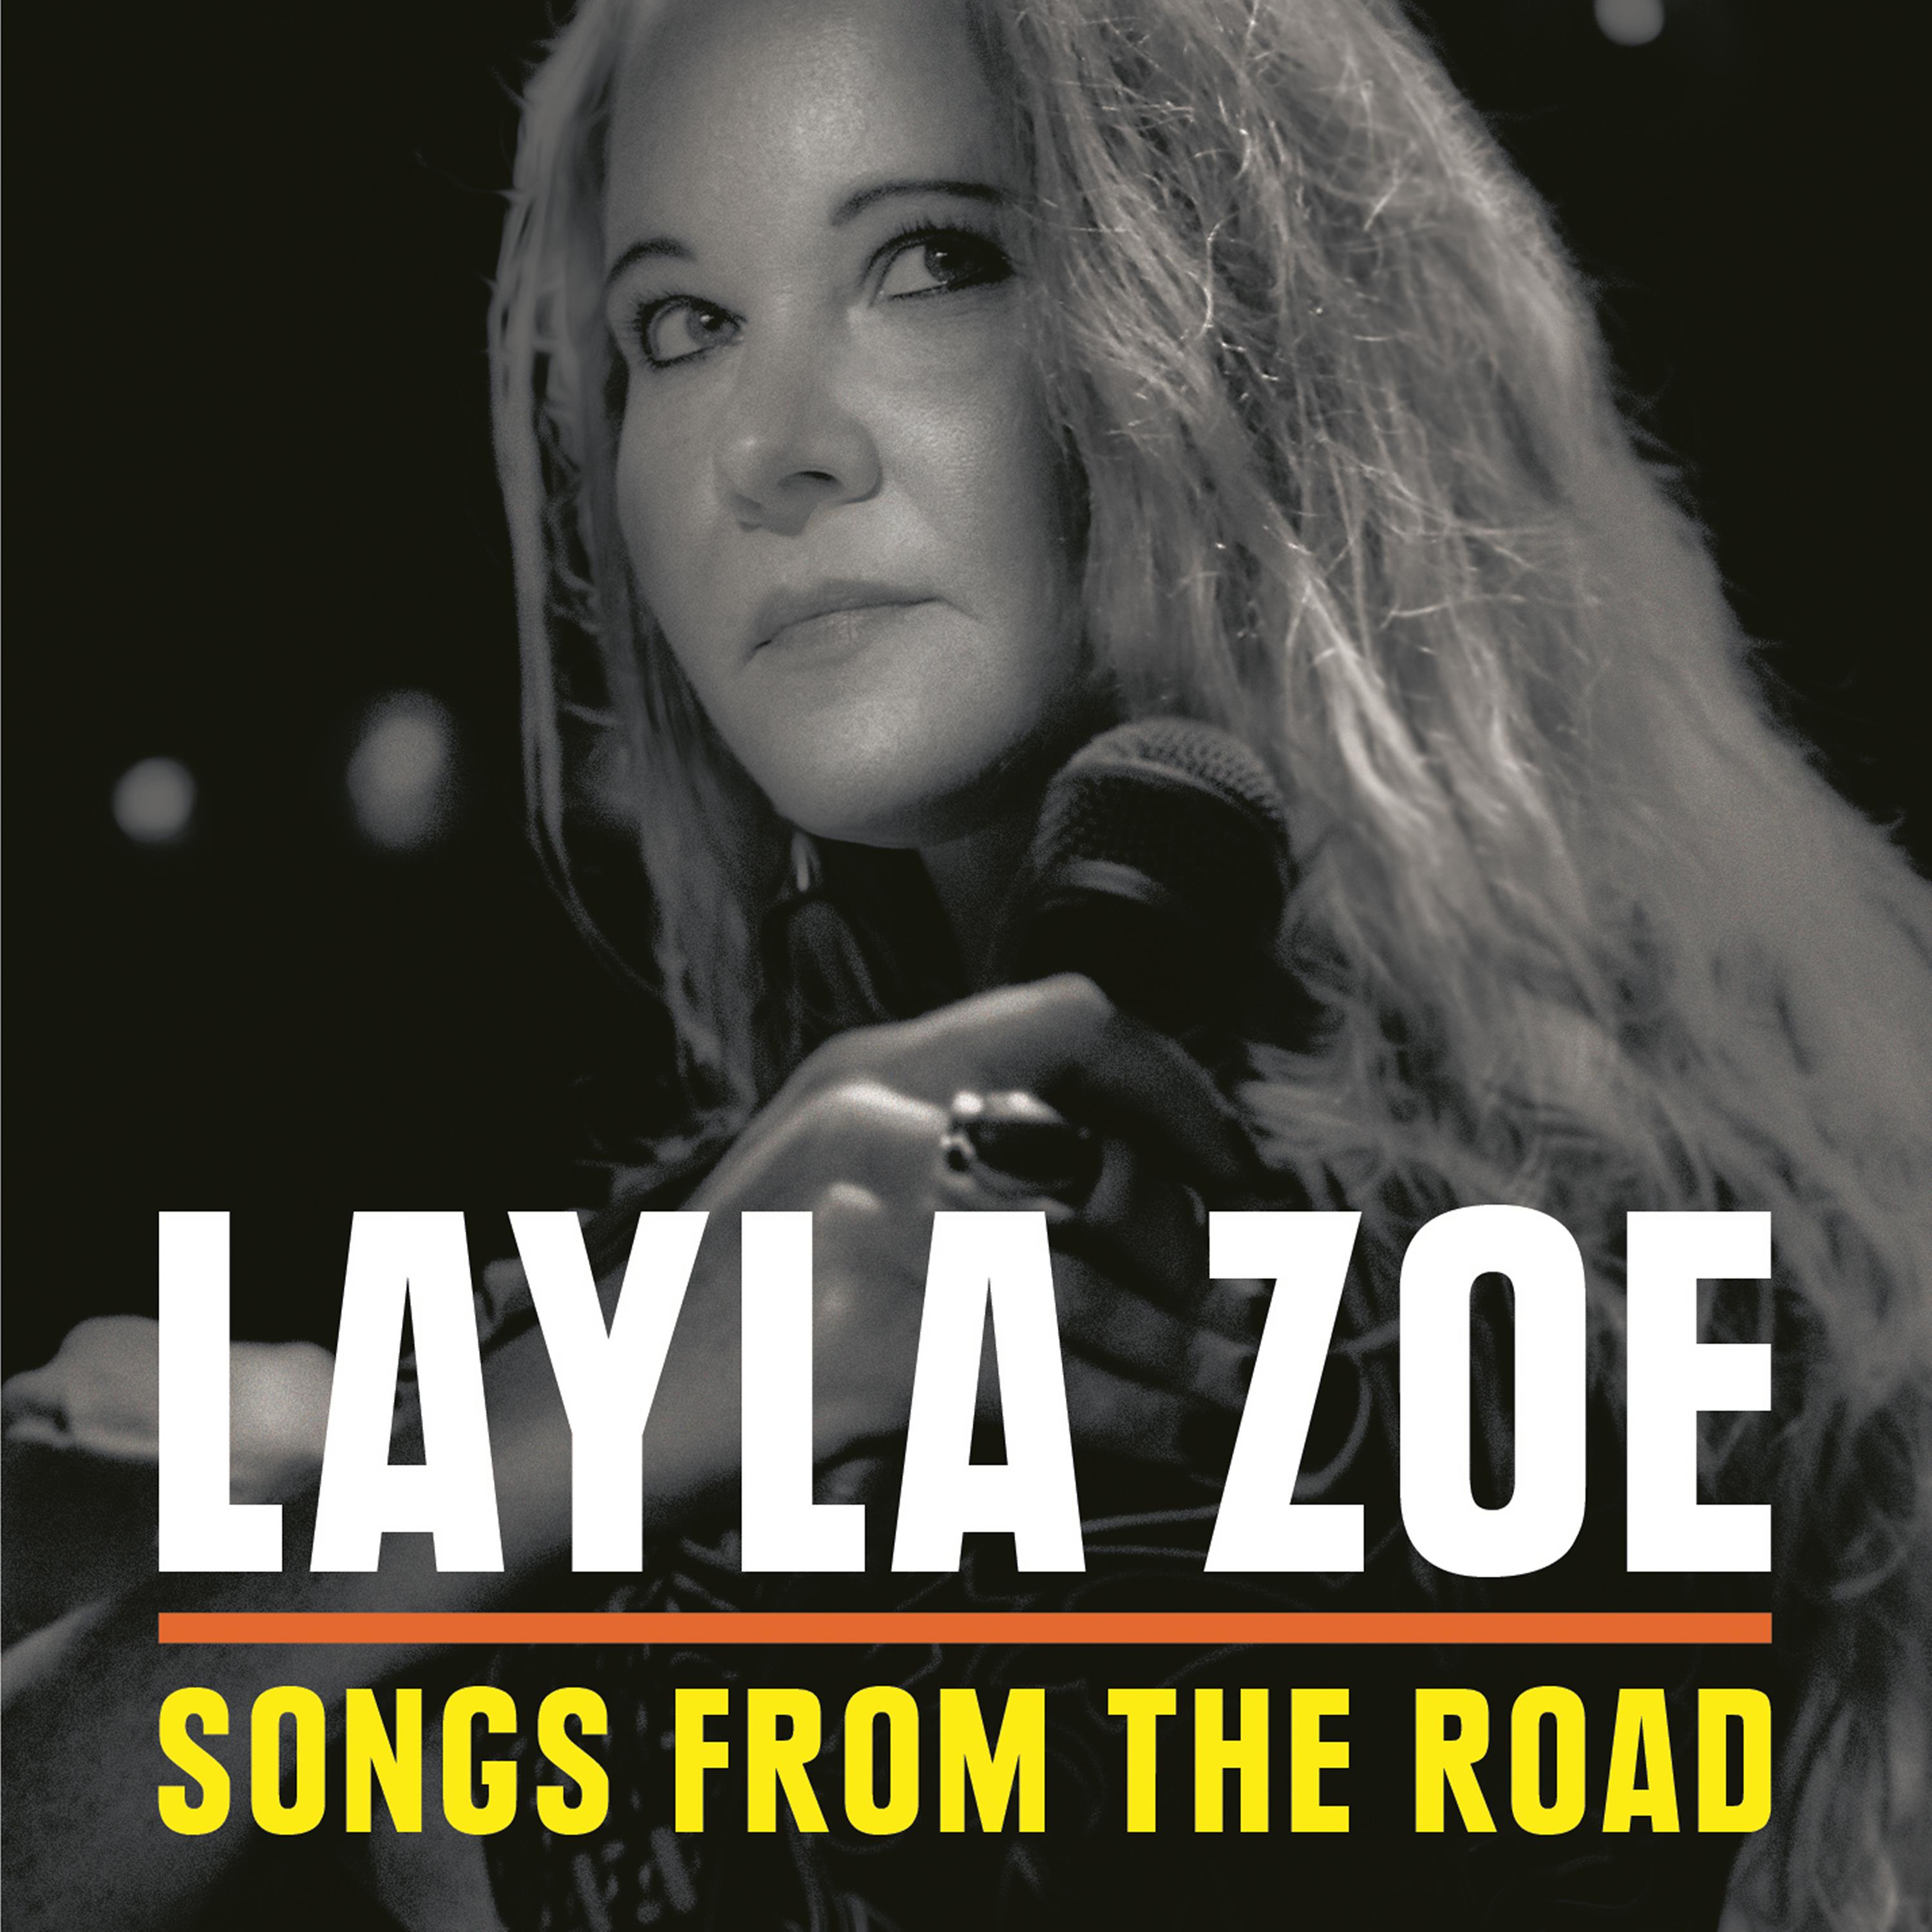 Layla Zoe - Songs From The Road (2017) [HDTracks FLAC 24bit/44,1kHz]